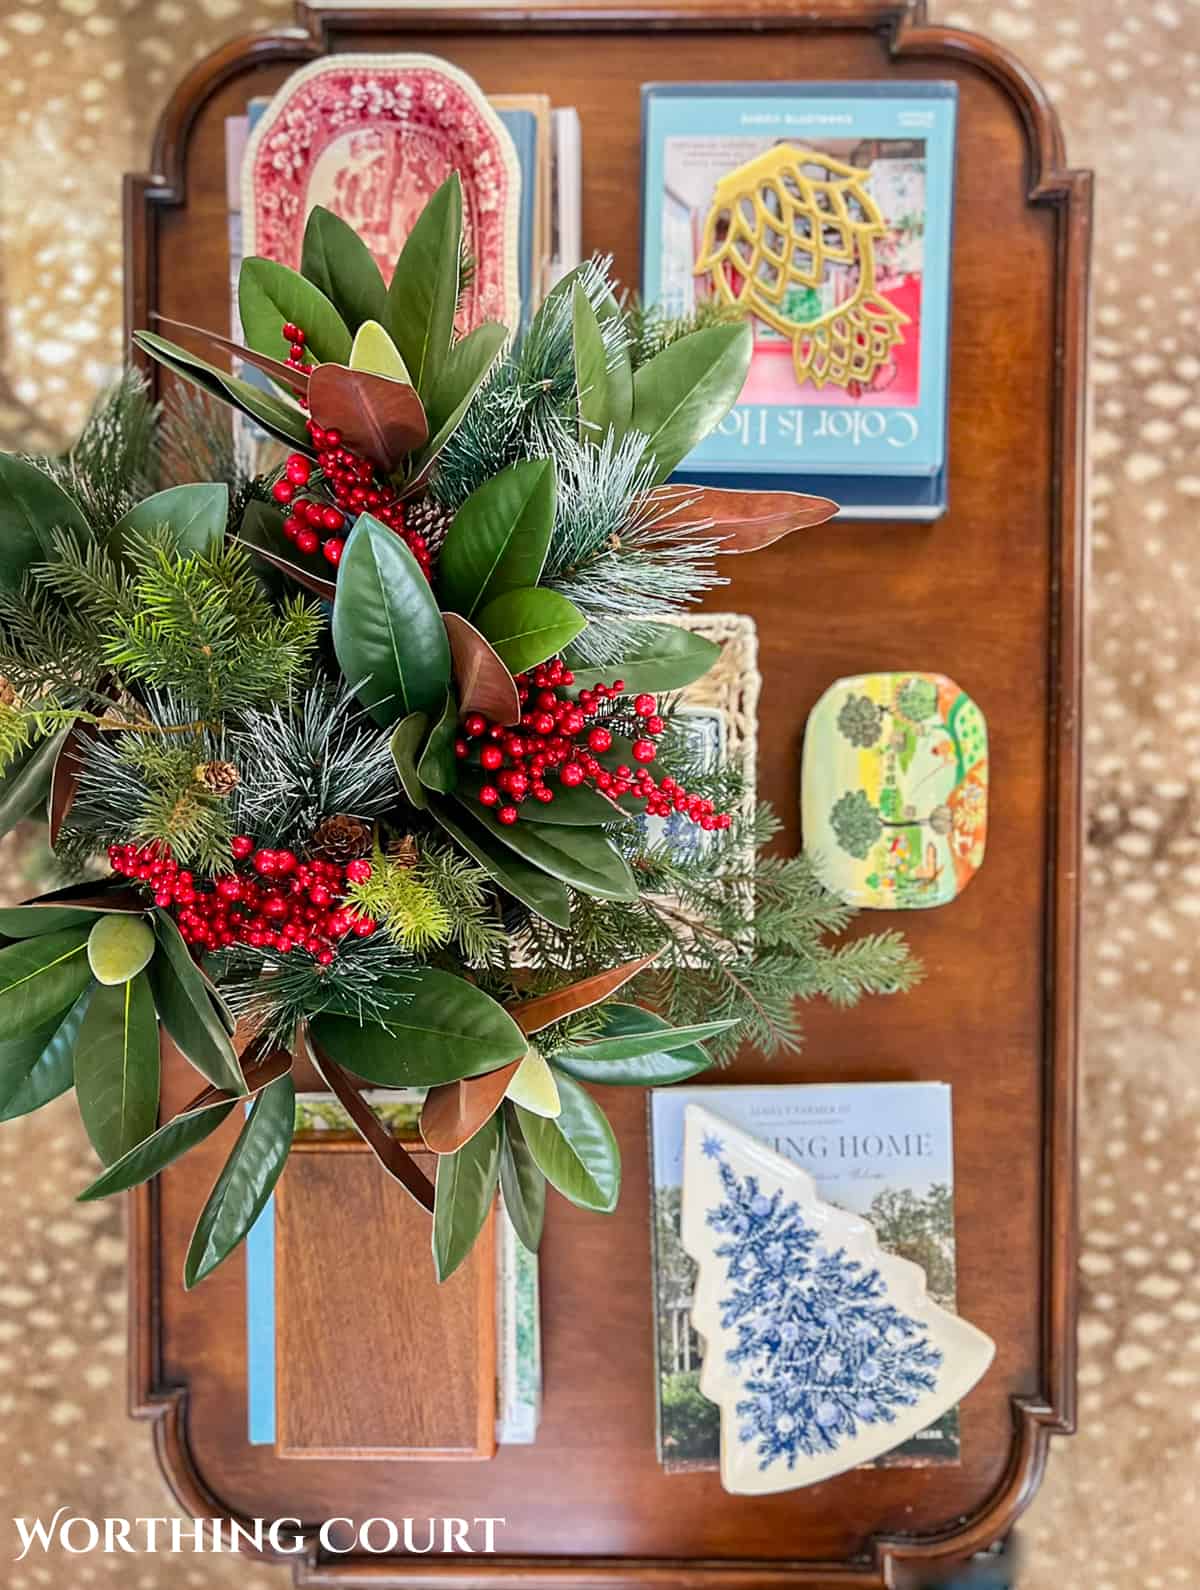 wood coffee table filled with easy decorations for Christmas consisting of coffee table books, Christmas dishes and a bowl filled with faux greenery and berries